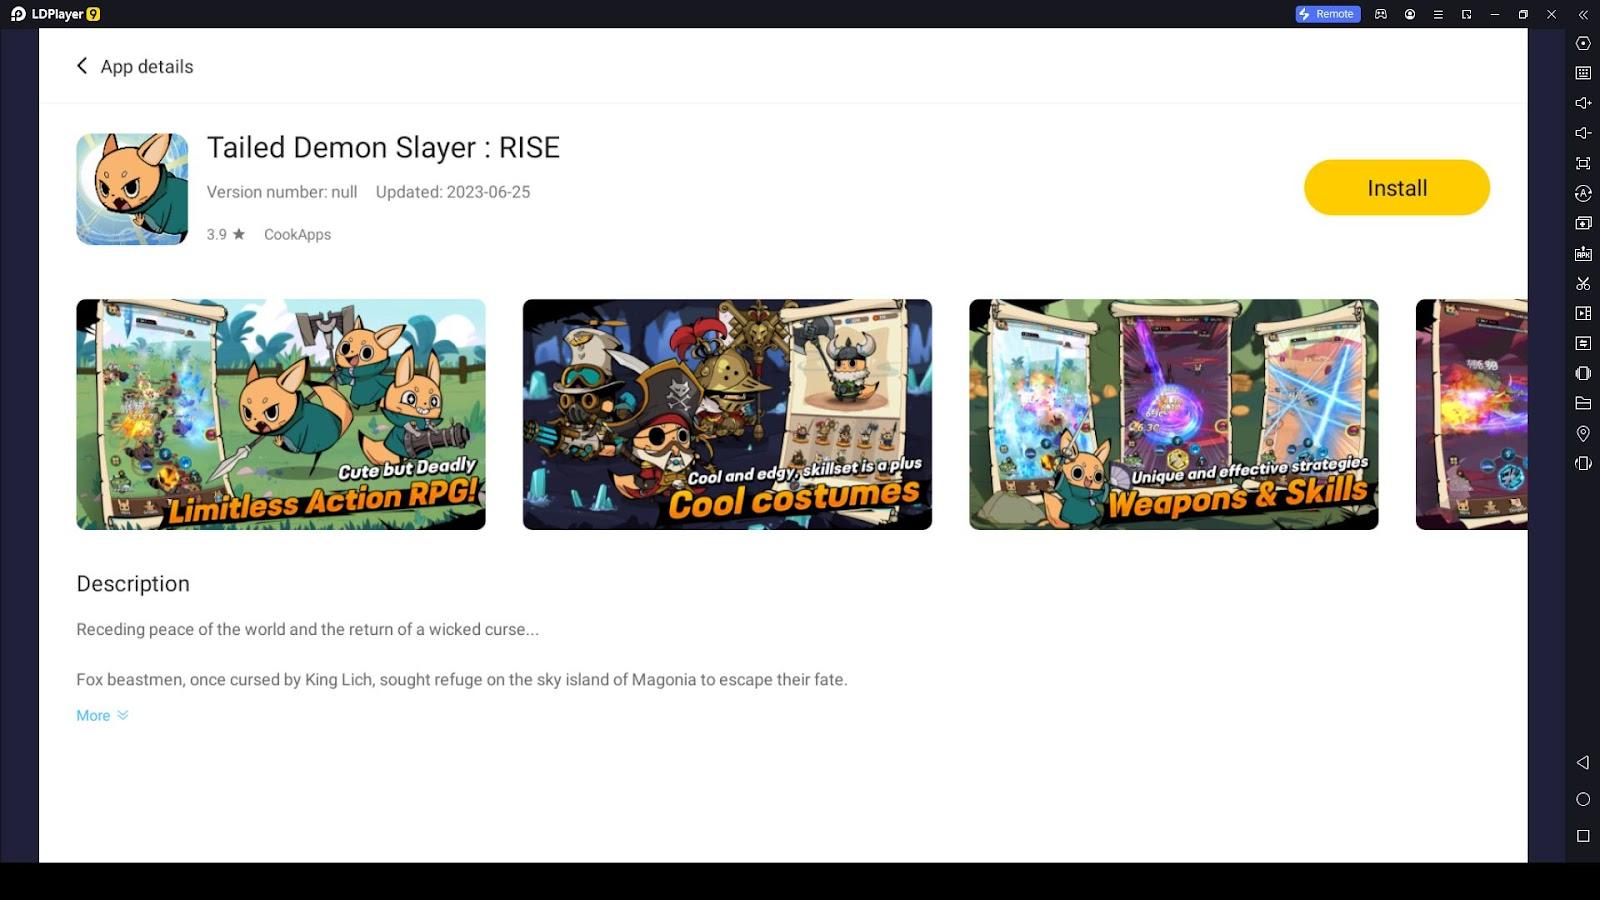 Running Tailed Demon Slayer: RISE on a PC